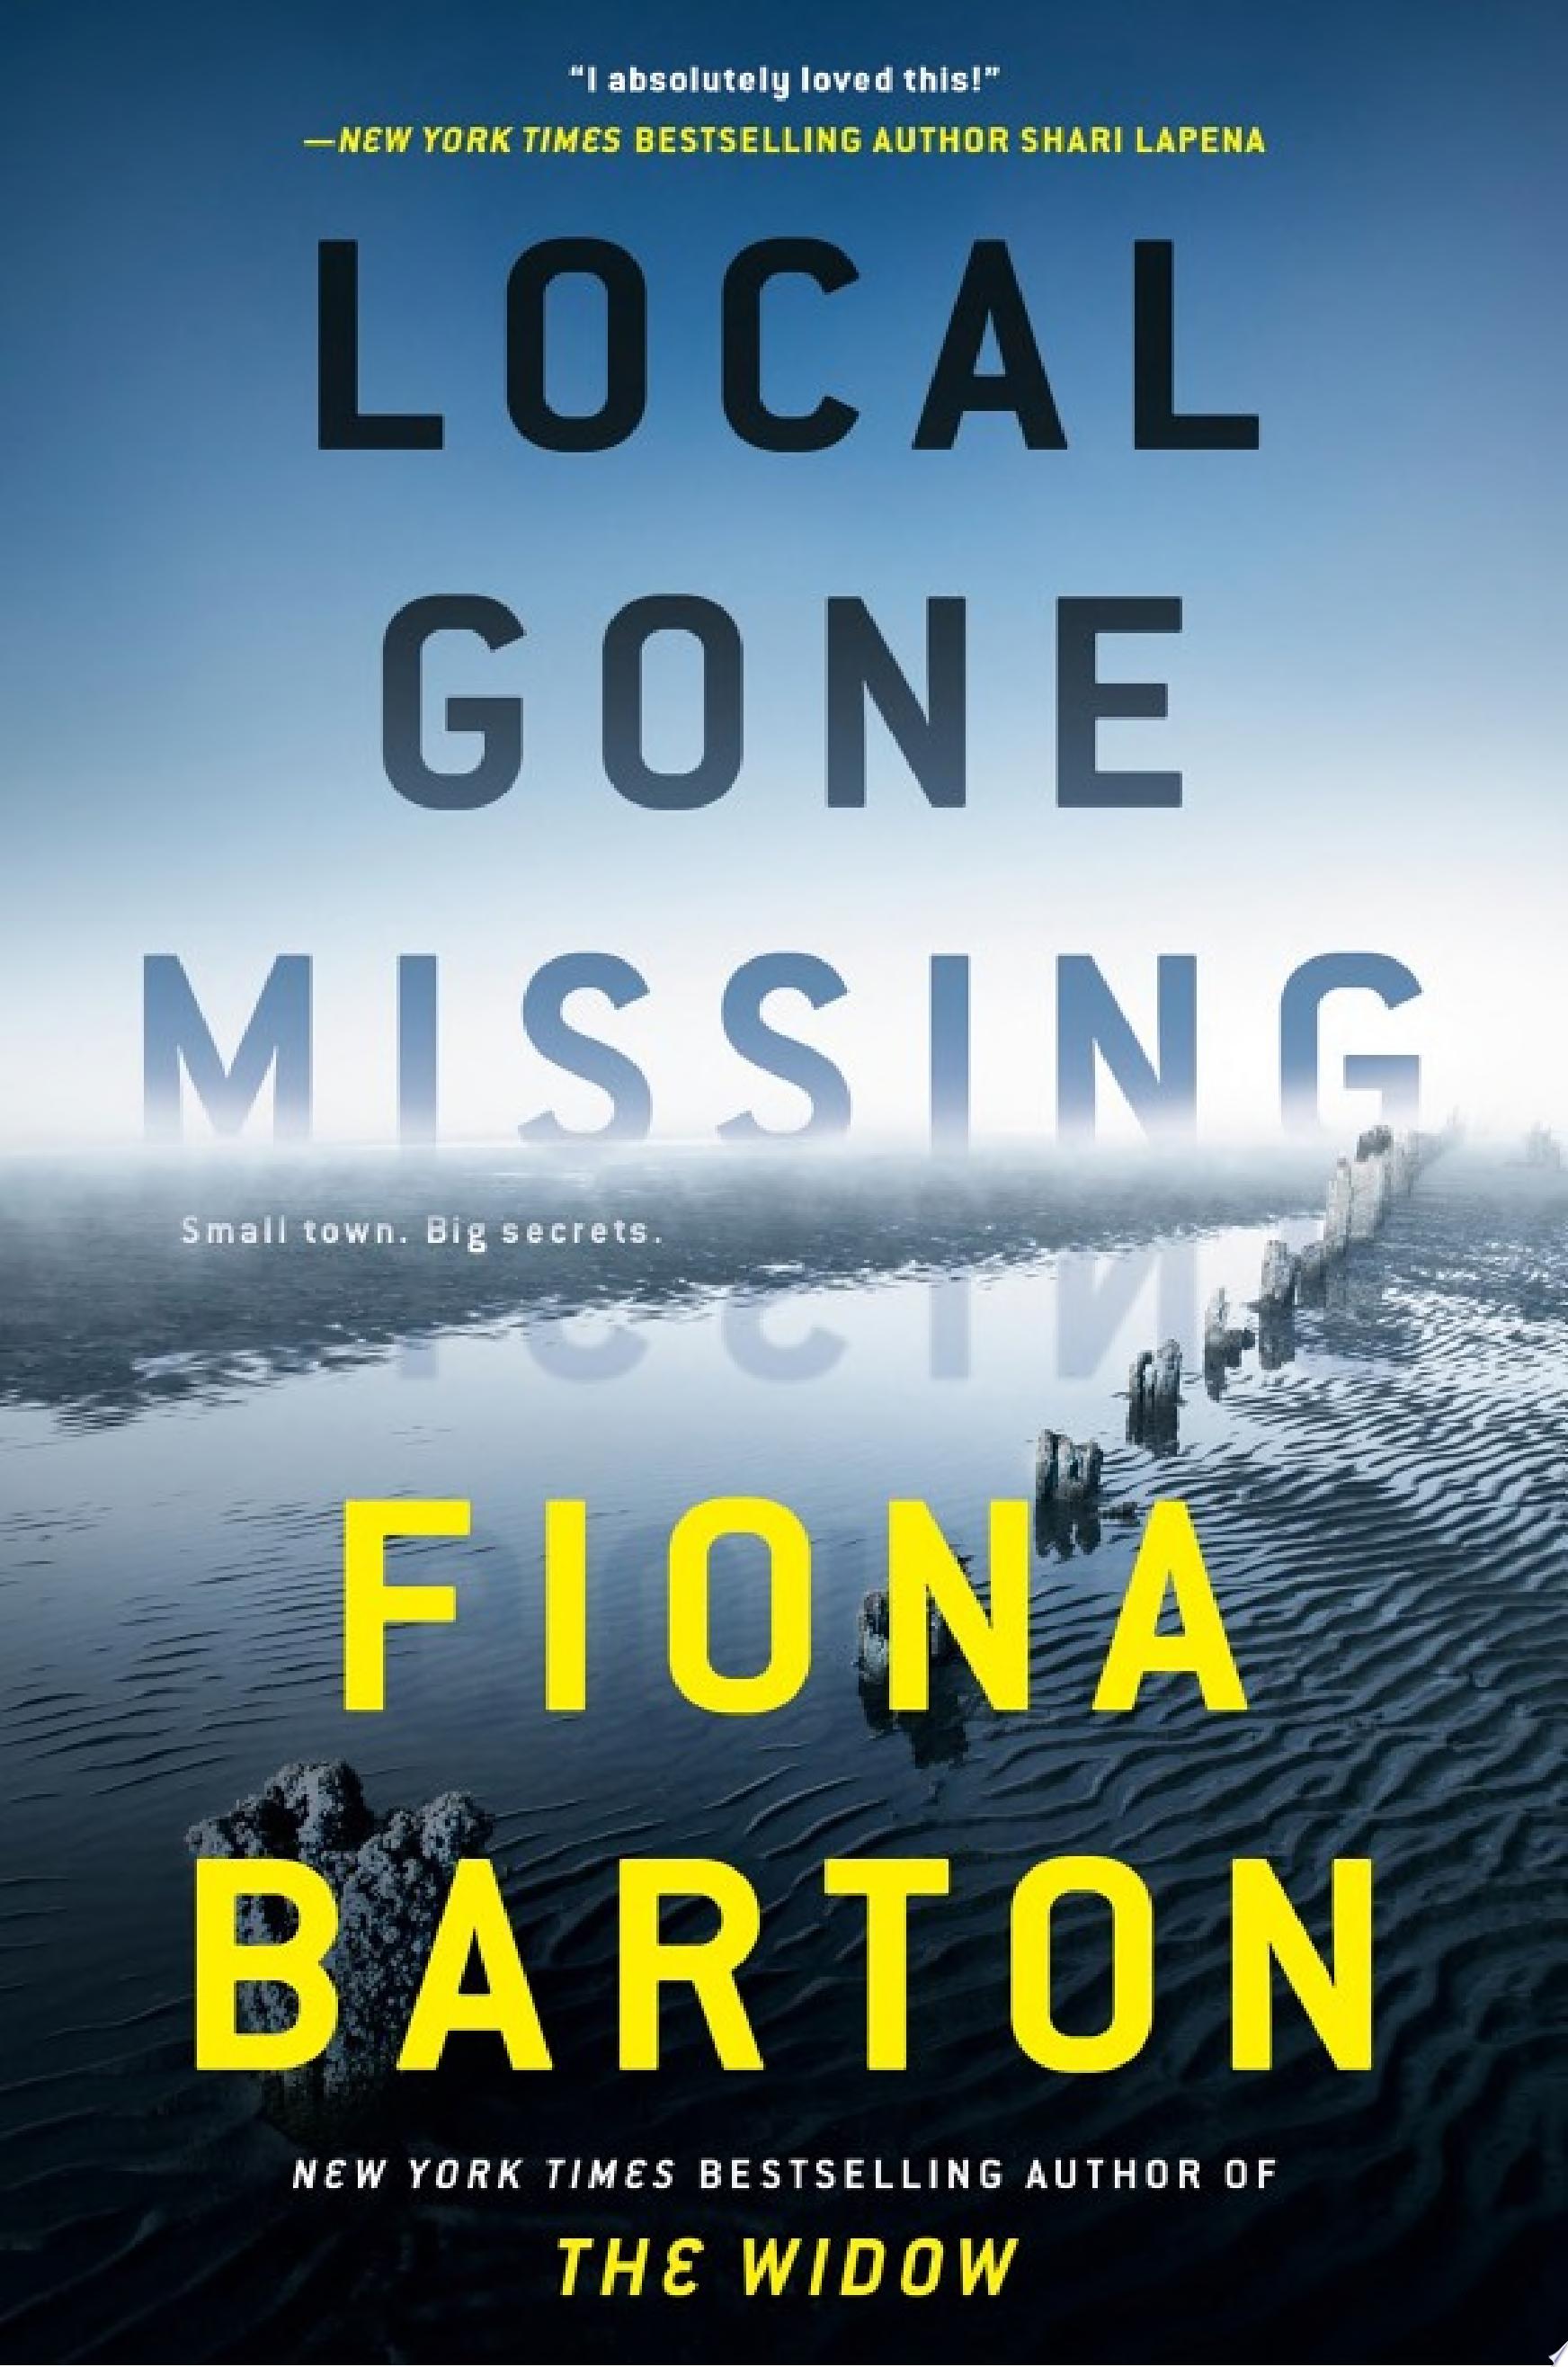 Image for "Local Gone Missing"